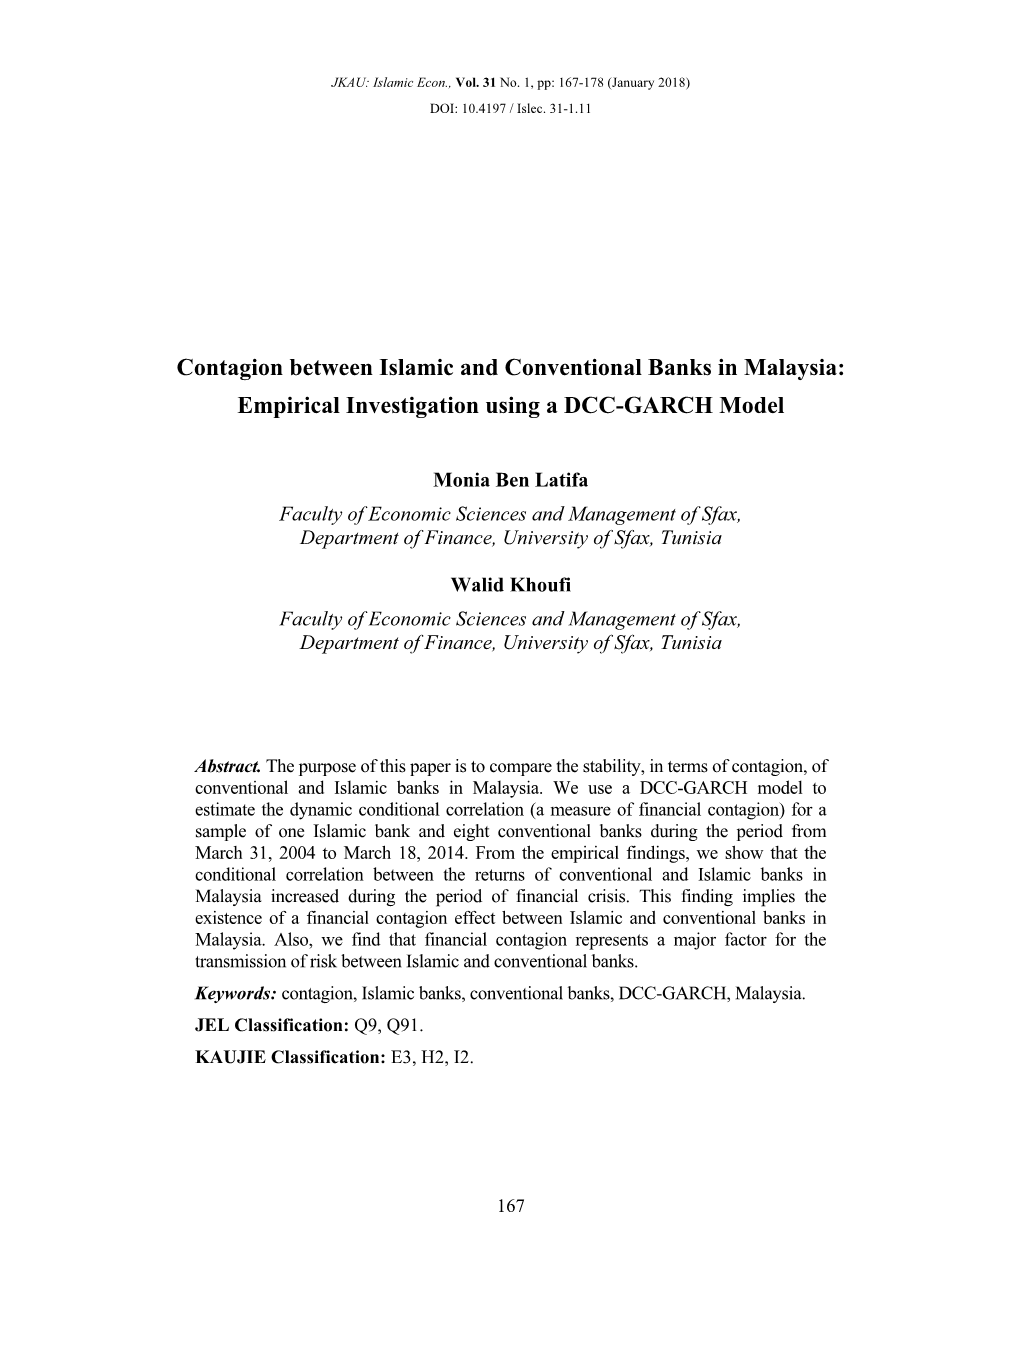 Contagion Between Islamic and Conventional Banks in Malaysia: Empirical Investigation Using a DCC-GARCH Model